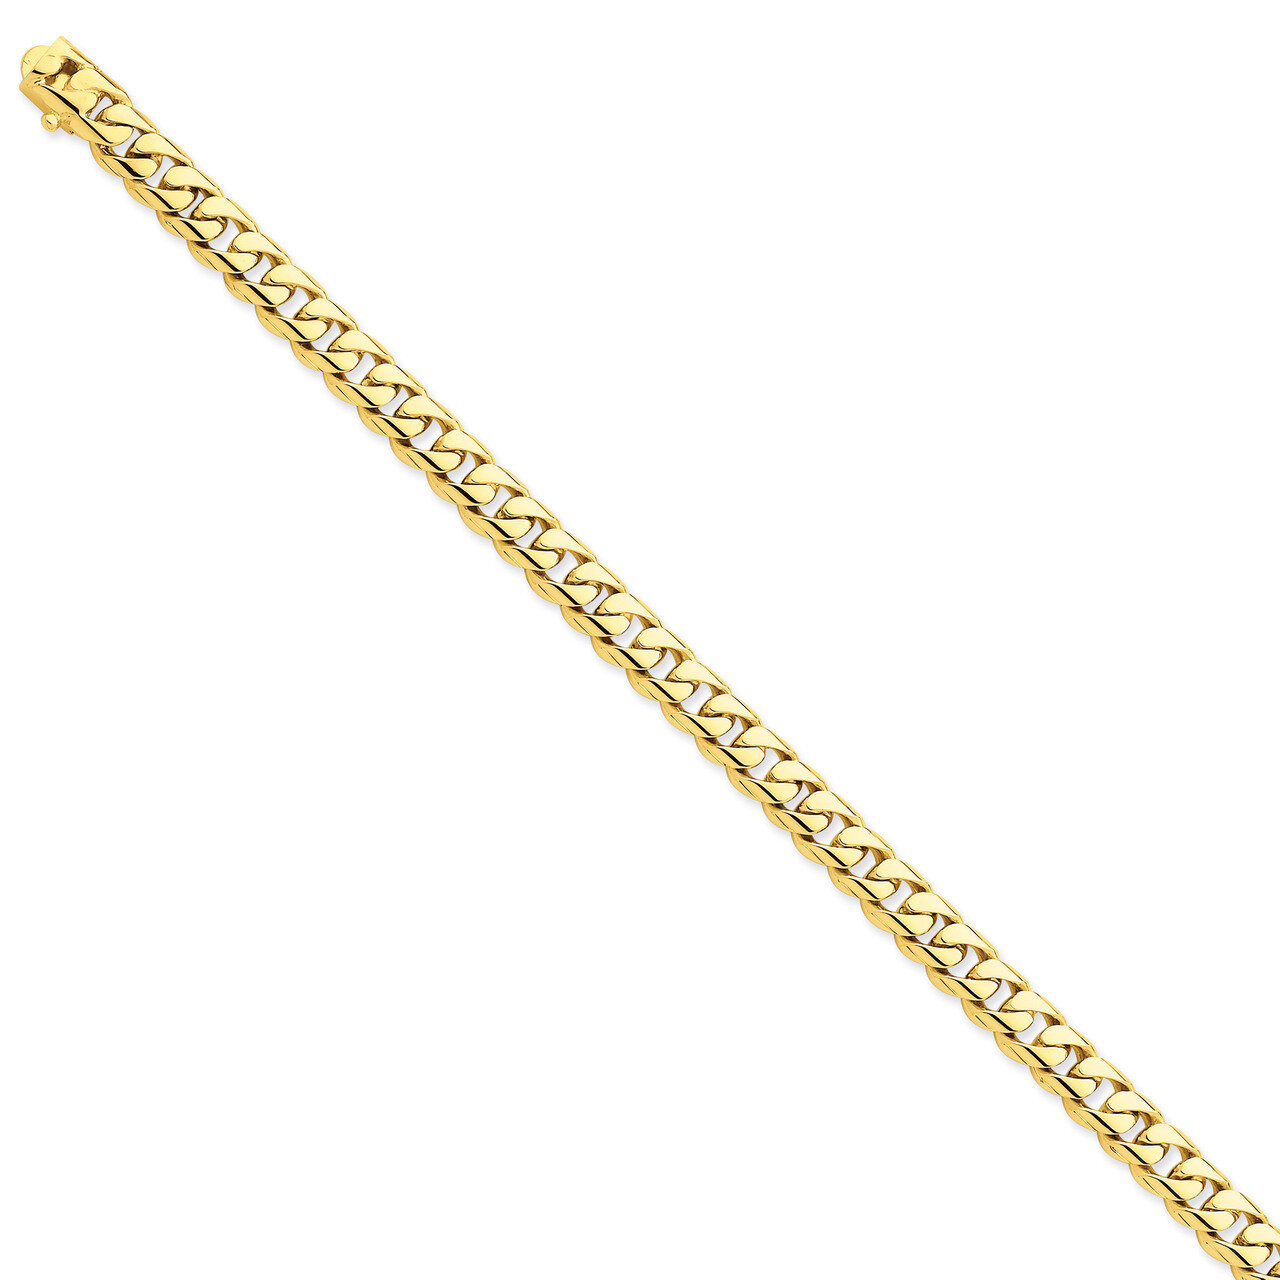 7.25mm Hand-polished Rounded Curb Chain 8 Inch 14k Gold LK124-8